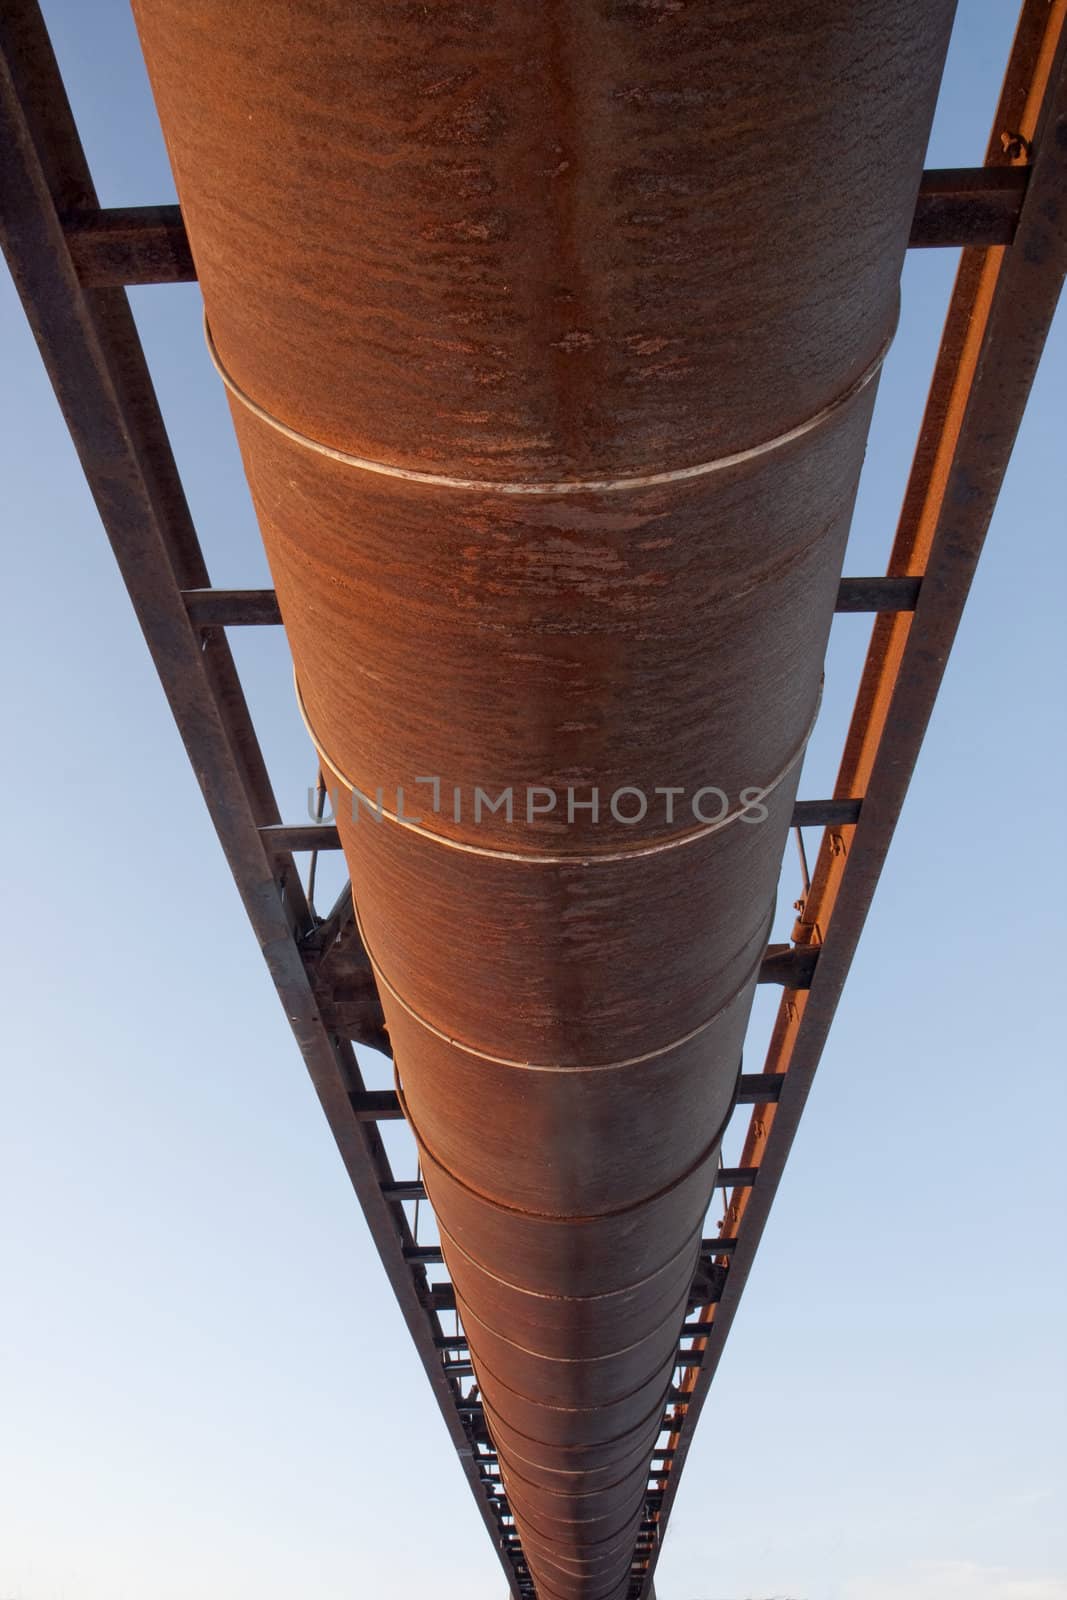 suspended rusty pipe shot from below by PixelsAway